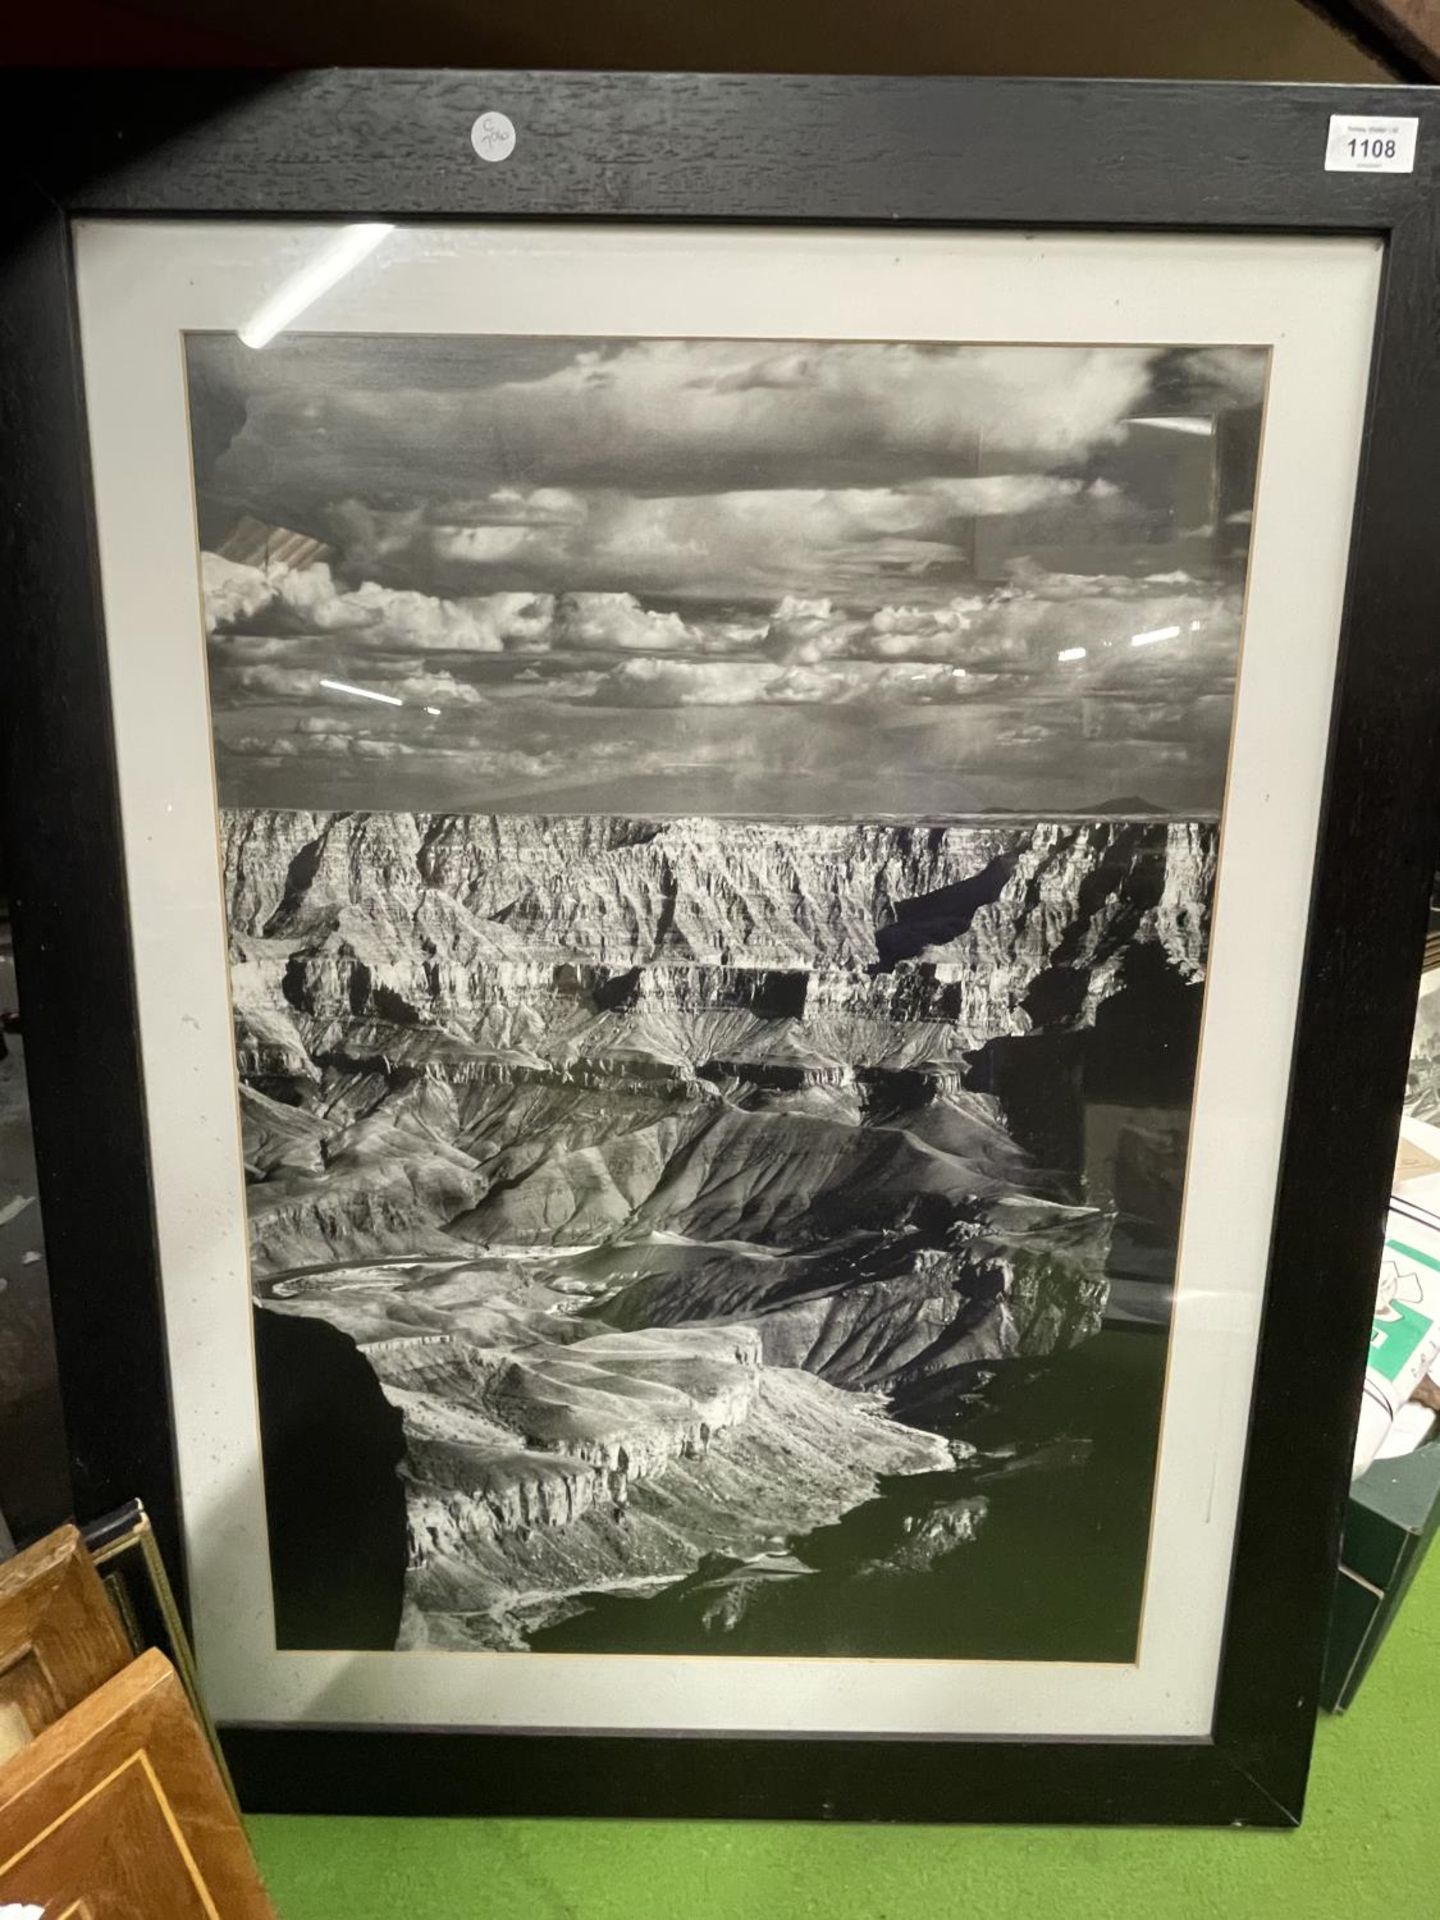 A LARGE PHOTOGRAPHIC BLACK AND WHITE PRINT OF THE GRAND CANYON, ARIZONA 70CM X 86CM